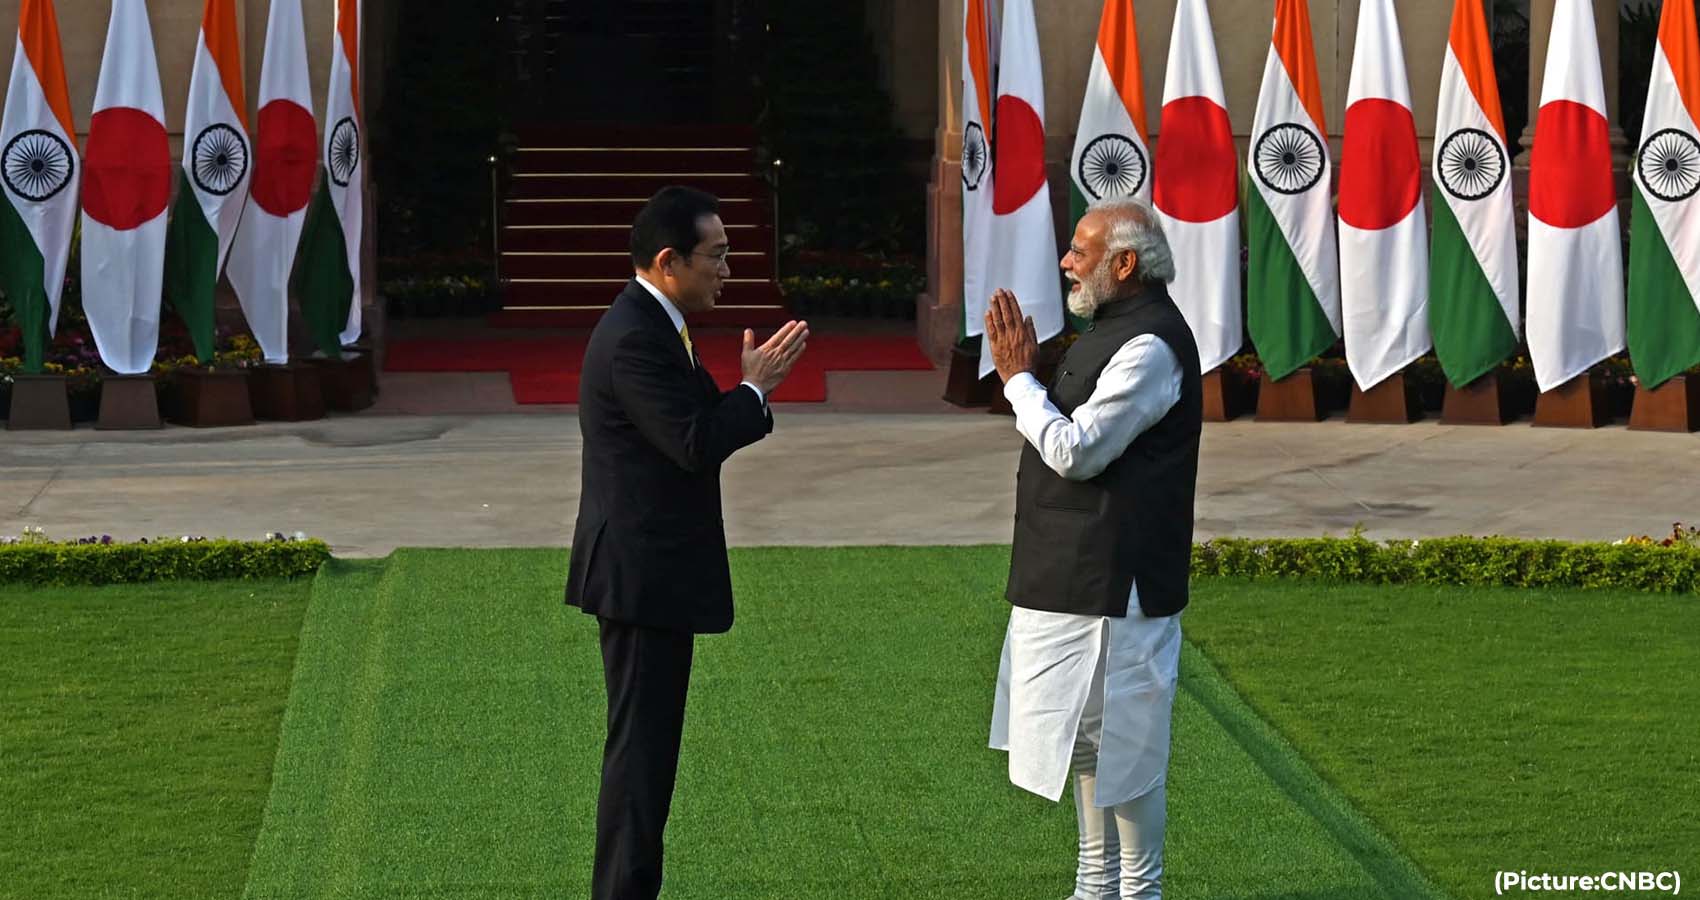 India is in a sweet spot, courted by the Quad, China and Russia